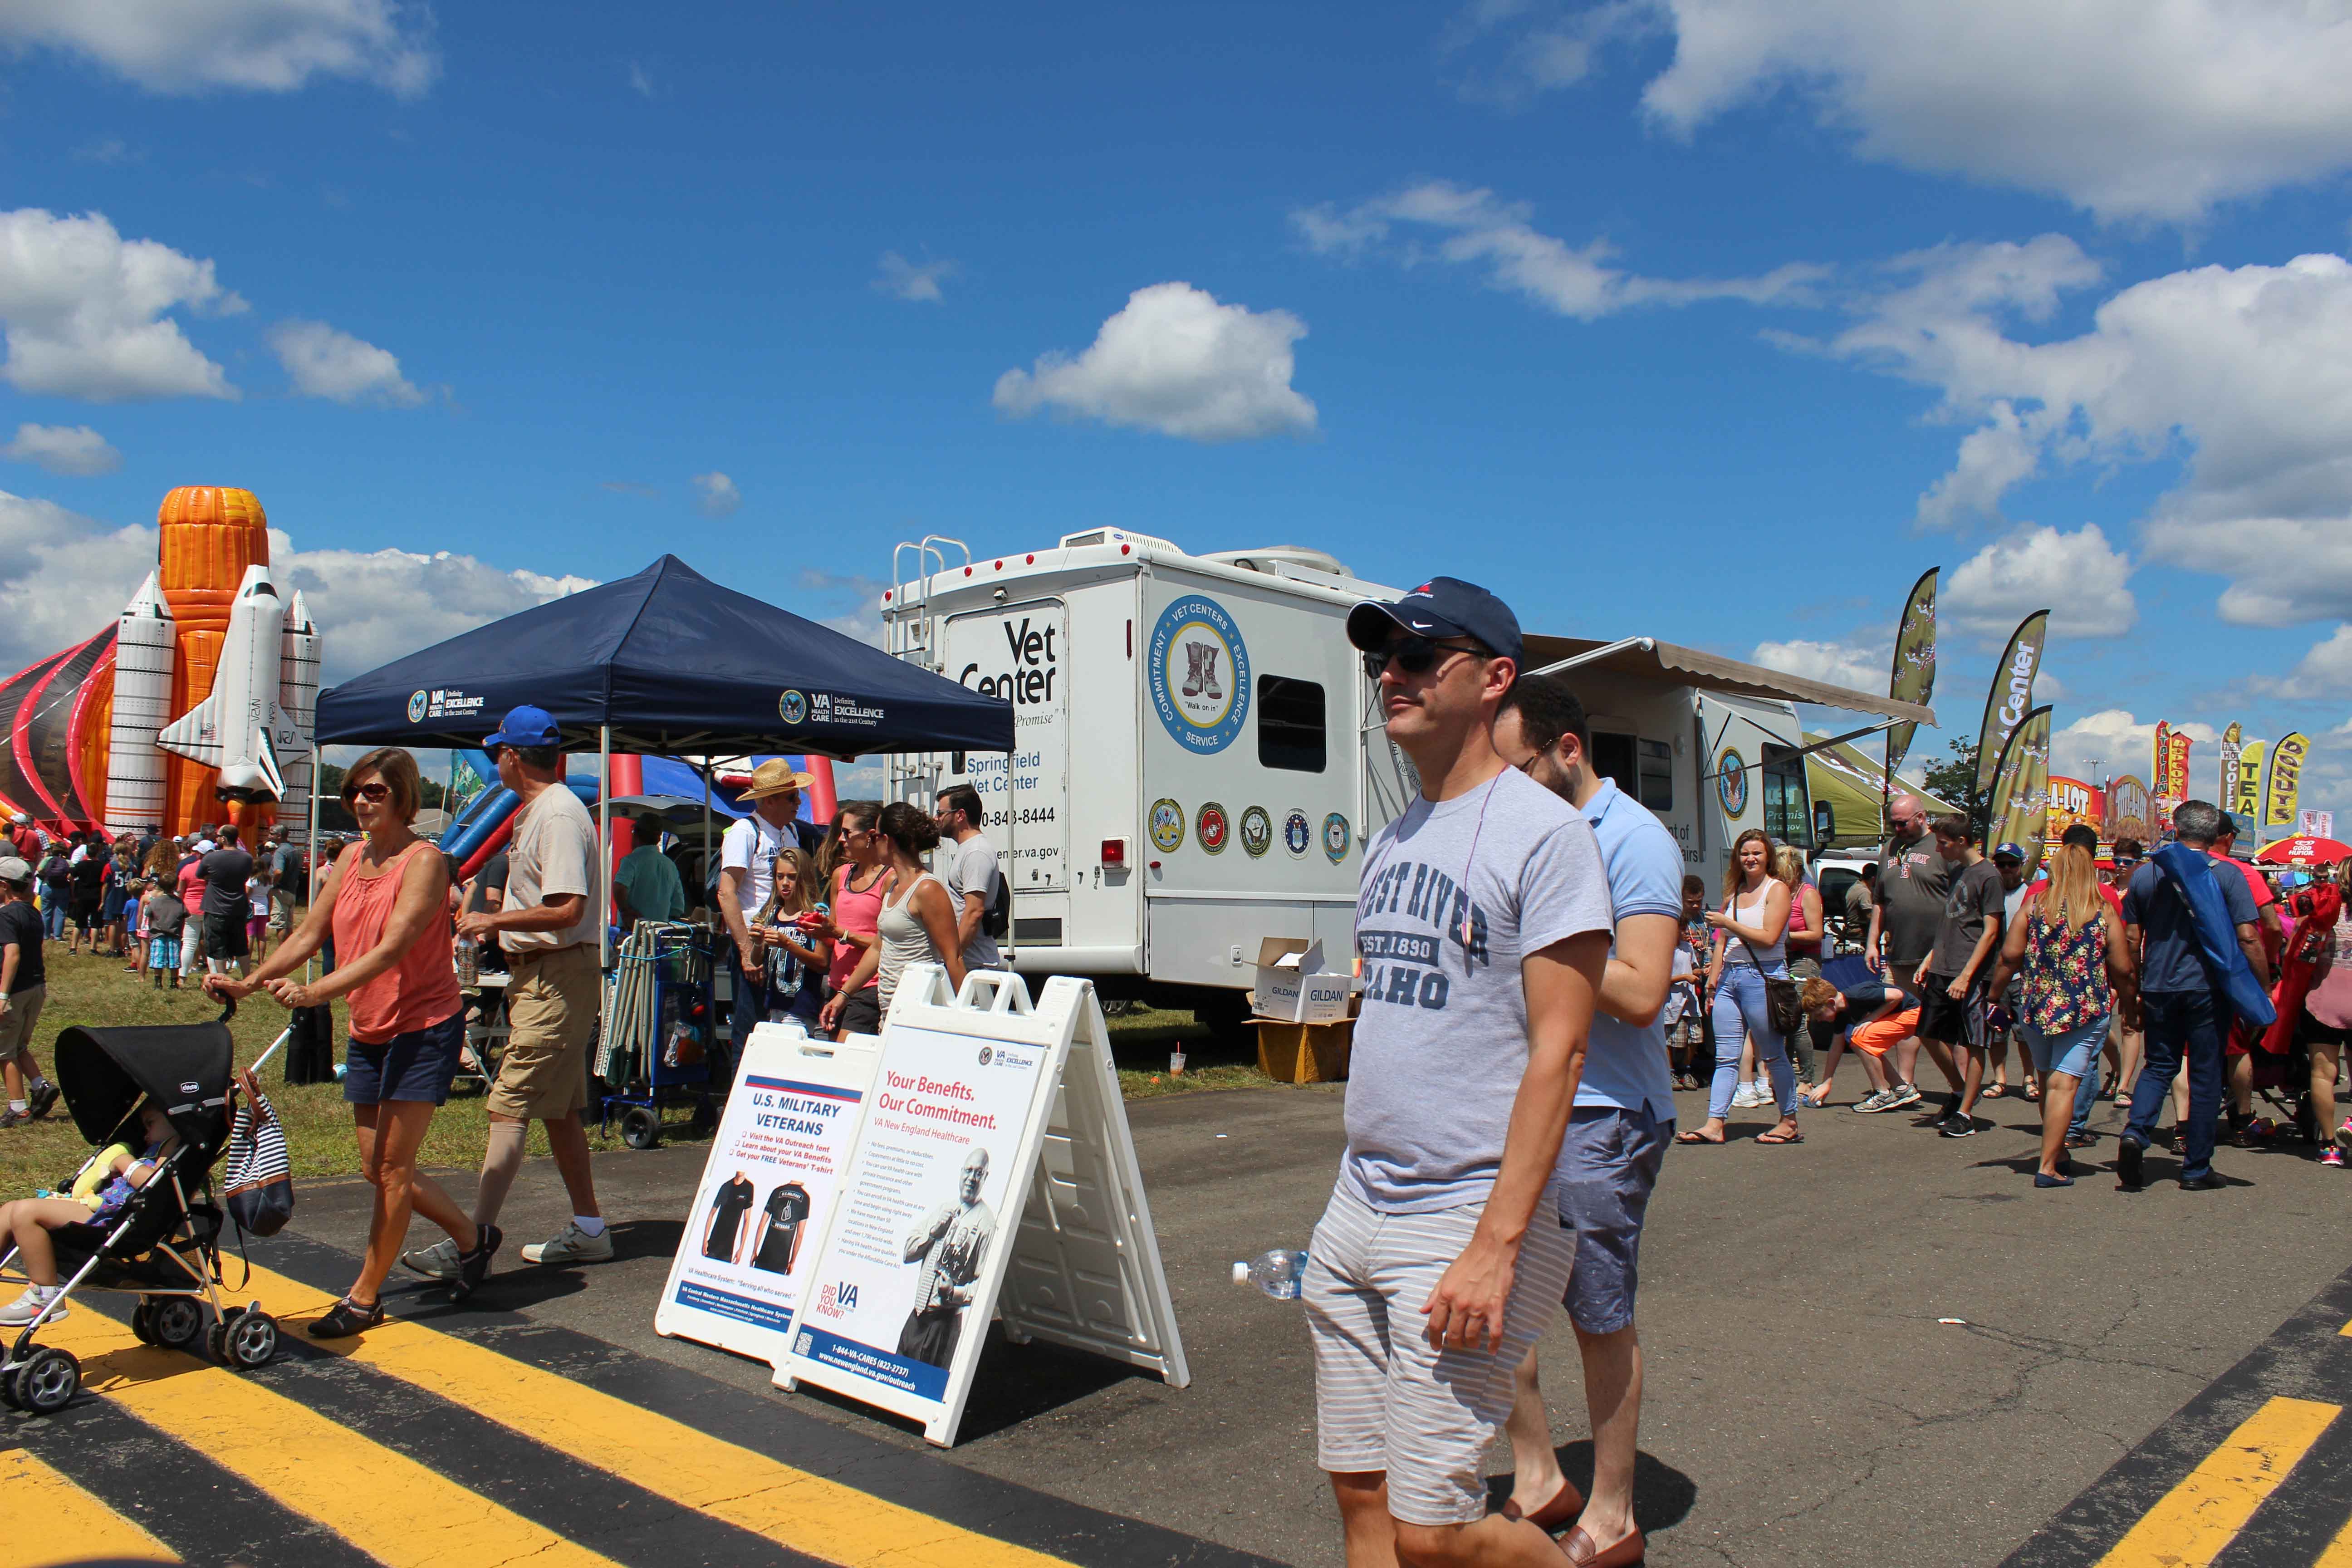 people walking past a Veteran's Affairs RV exhibit with a blue popup tent next to it at an air show